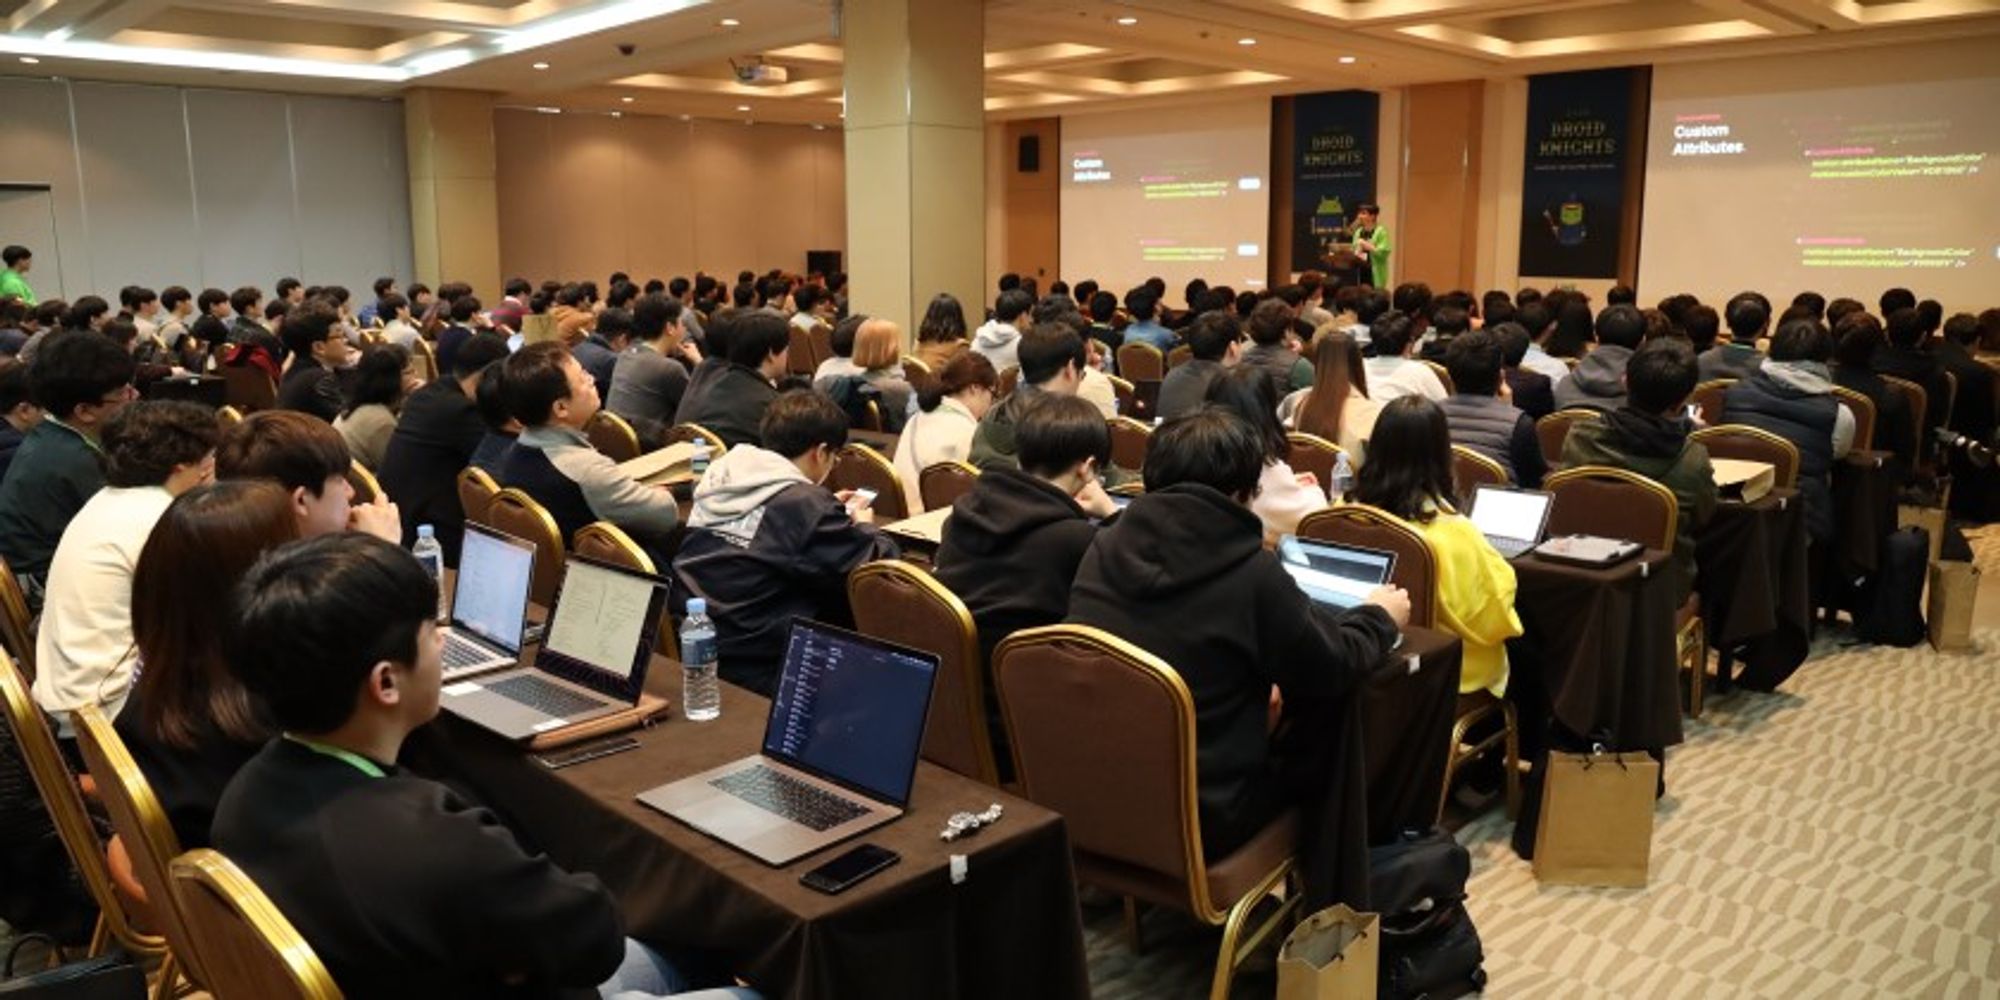 Korea's largest Android conference, Droid Knights 2023